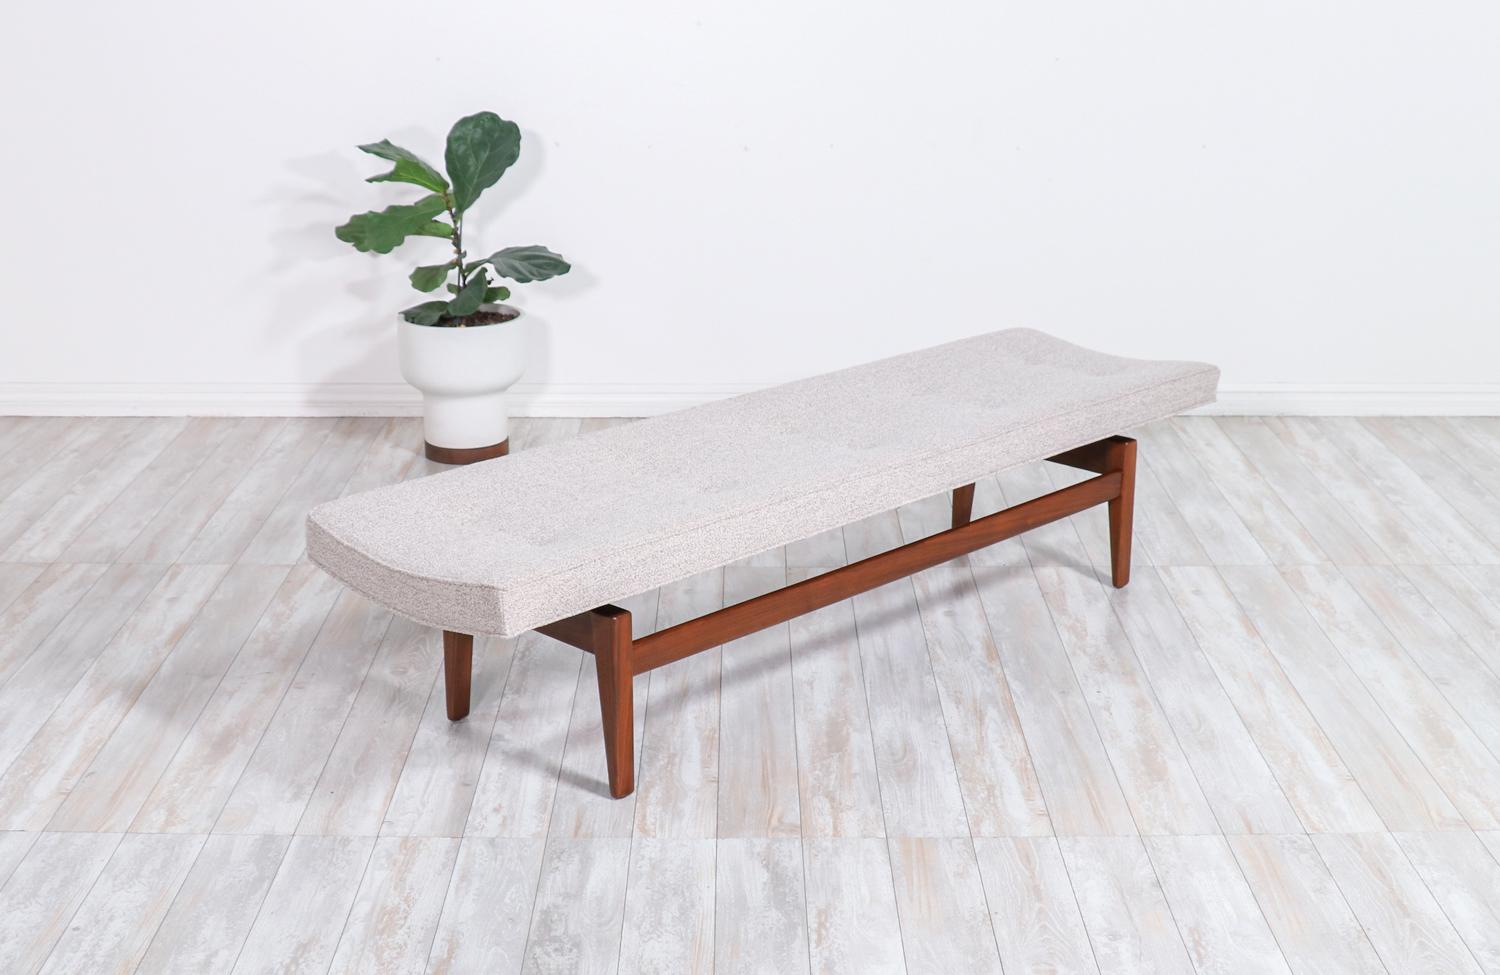 Jens Risom tufted bench with floating walnut base.